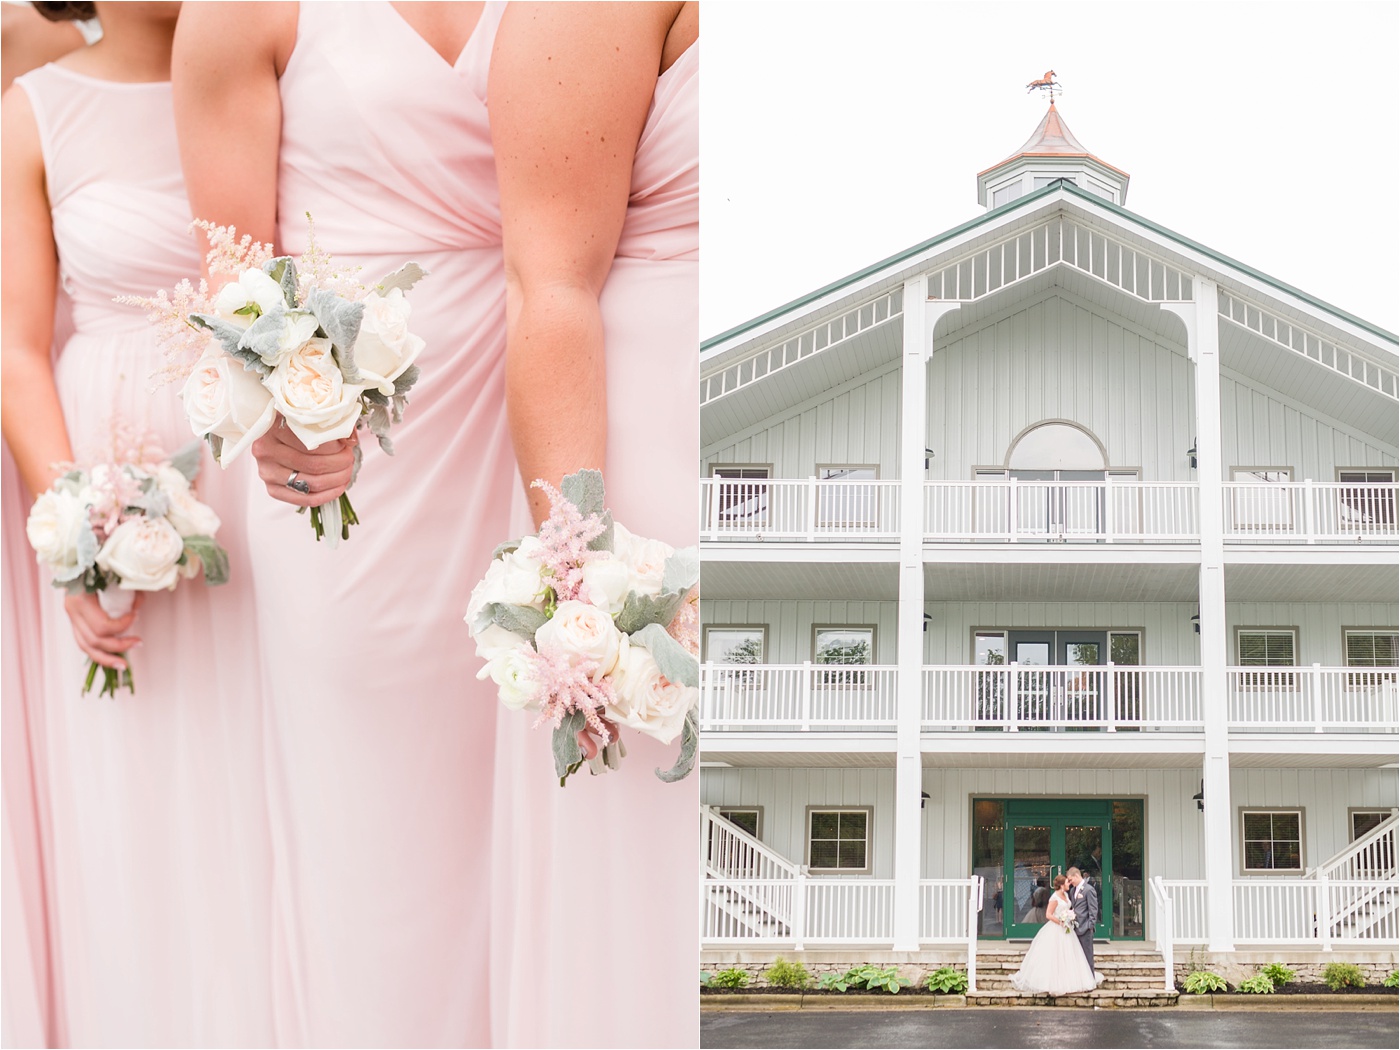 A Blush Outdoor wedding at Irongate Equestrian | KariMe Photography_0101